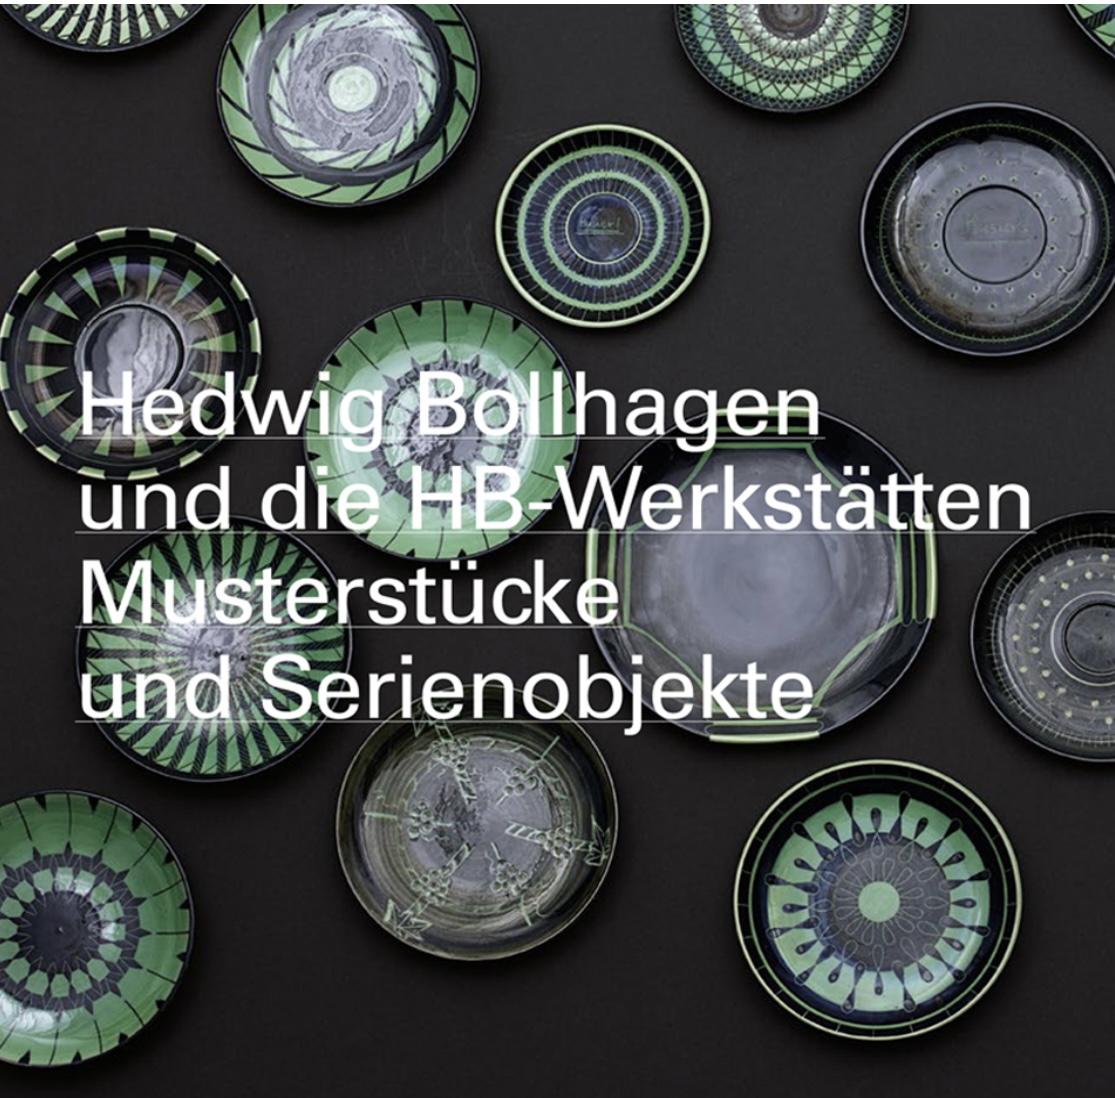 Cover with the Title - Hedwig Bollhagen und die HB-Werkstätten. Musterstücke und Serienobjekte in white letters on a photo of bowl with black and green decors placed on a black surface